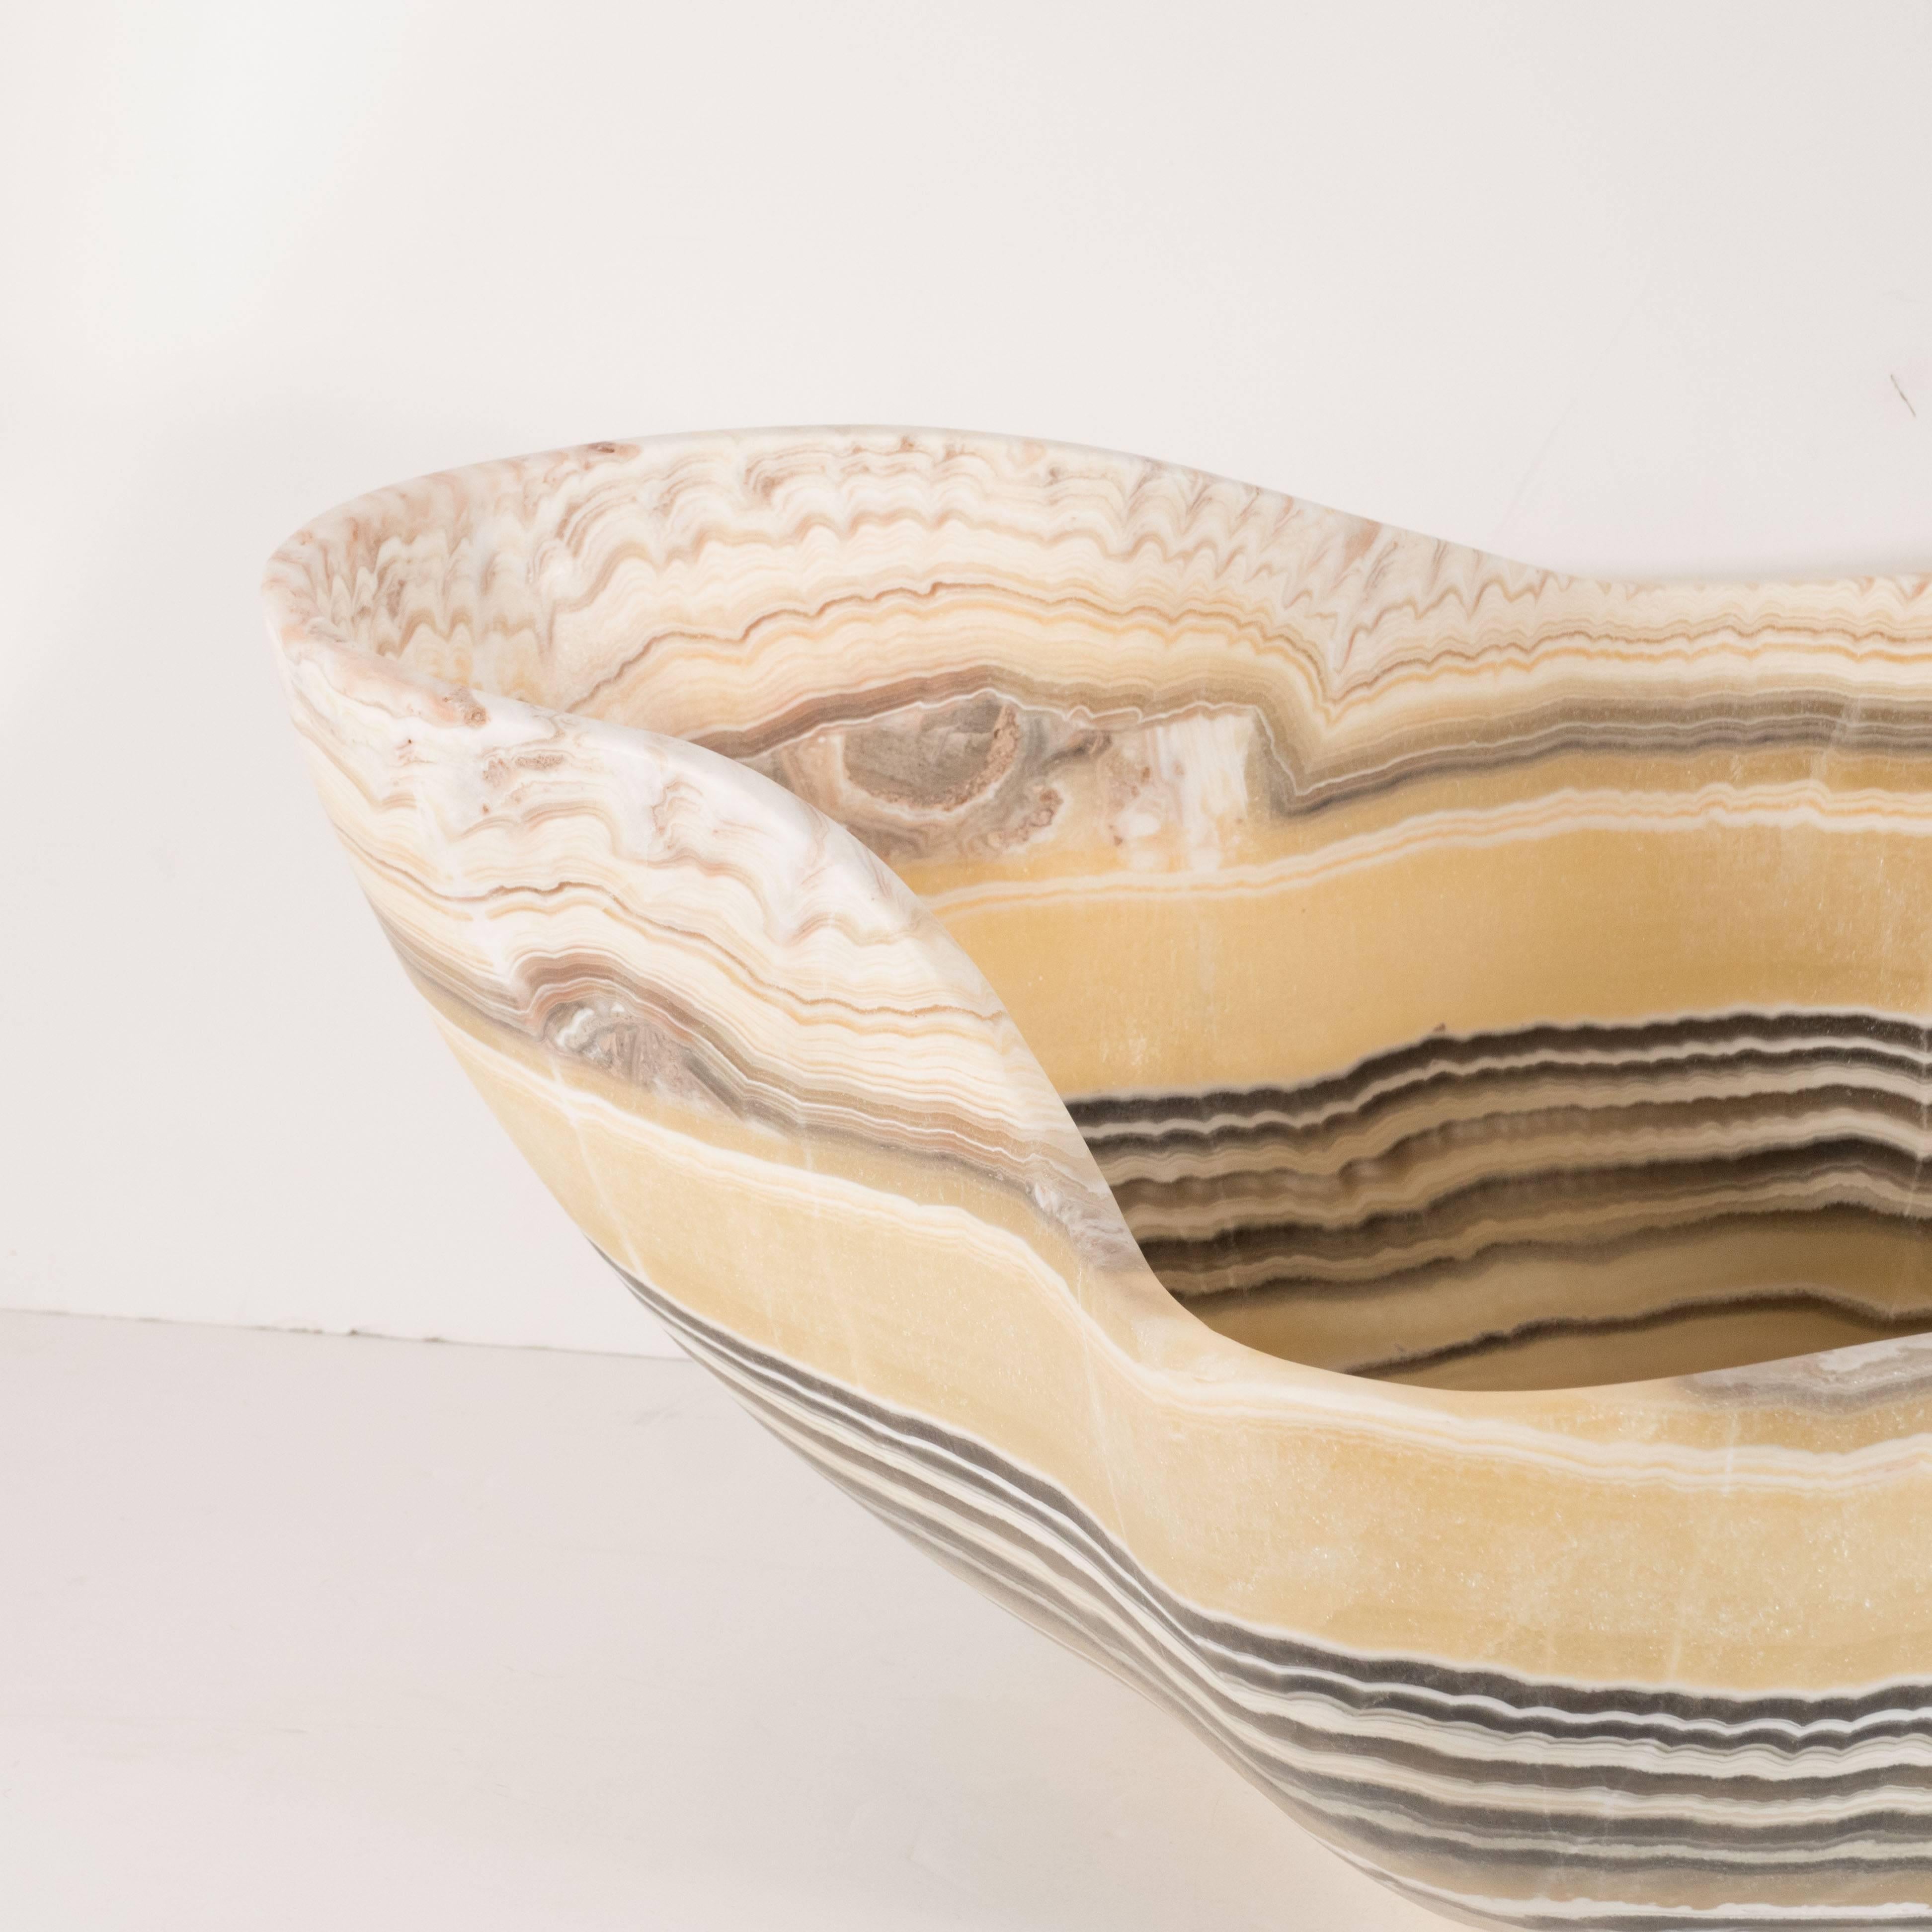 Organic Modern Agate Bowl with Grisaille Bands against a Honeyed Background 1